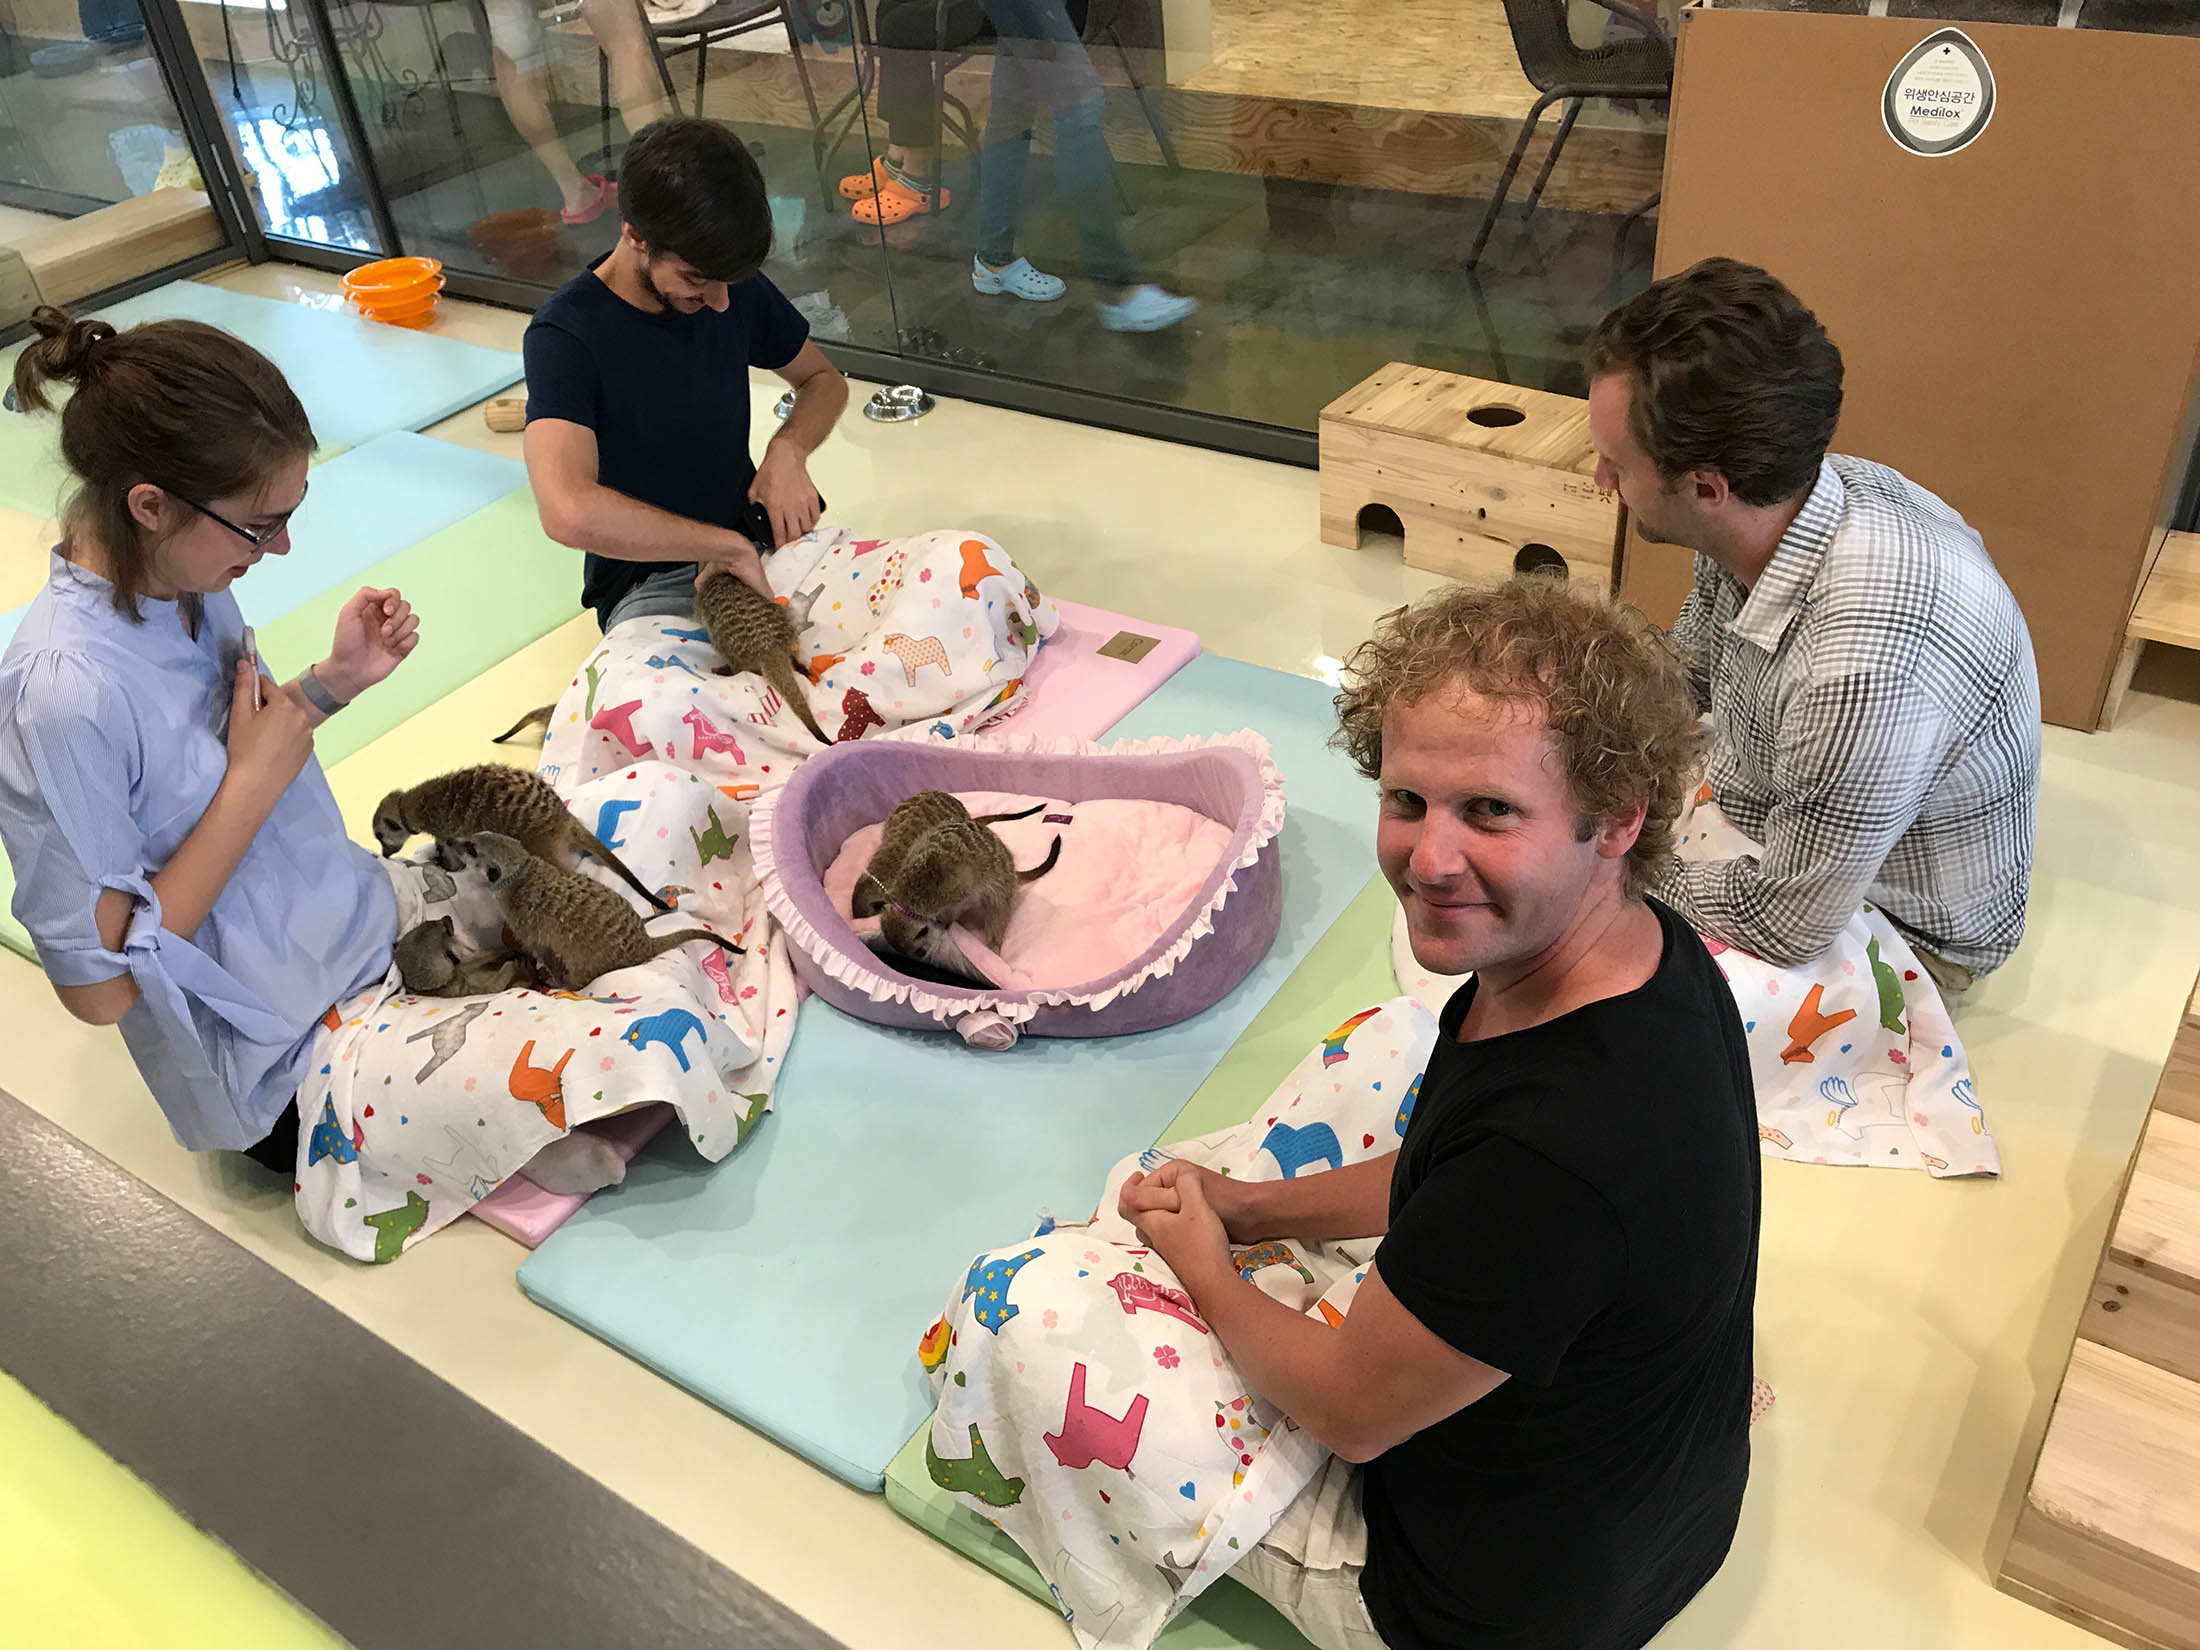 Ben and friends playing with meerkats at Seoul's Meerkat Friends Café